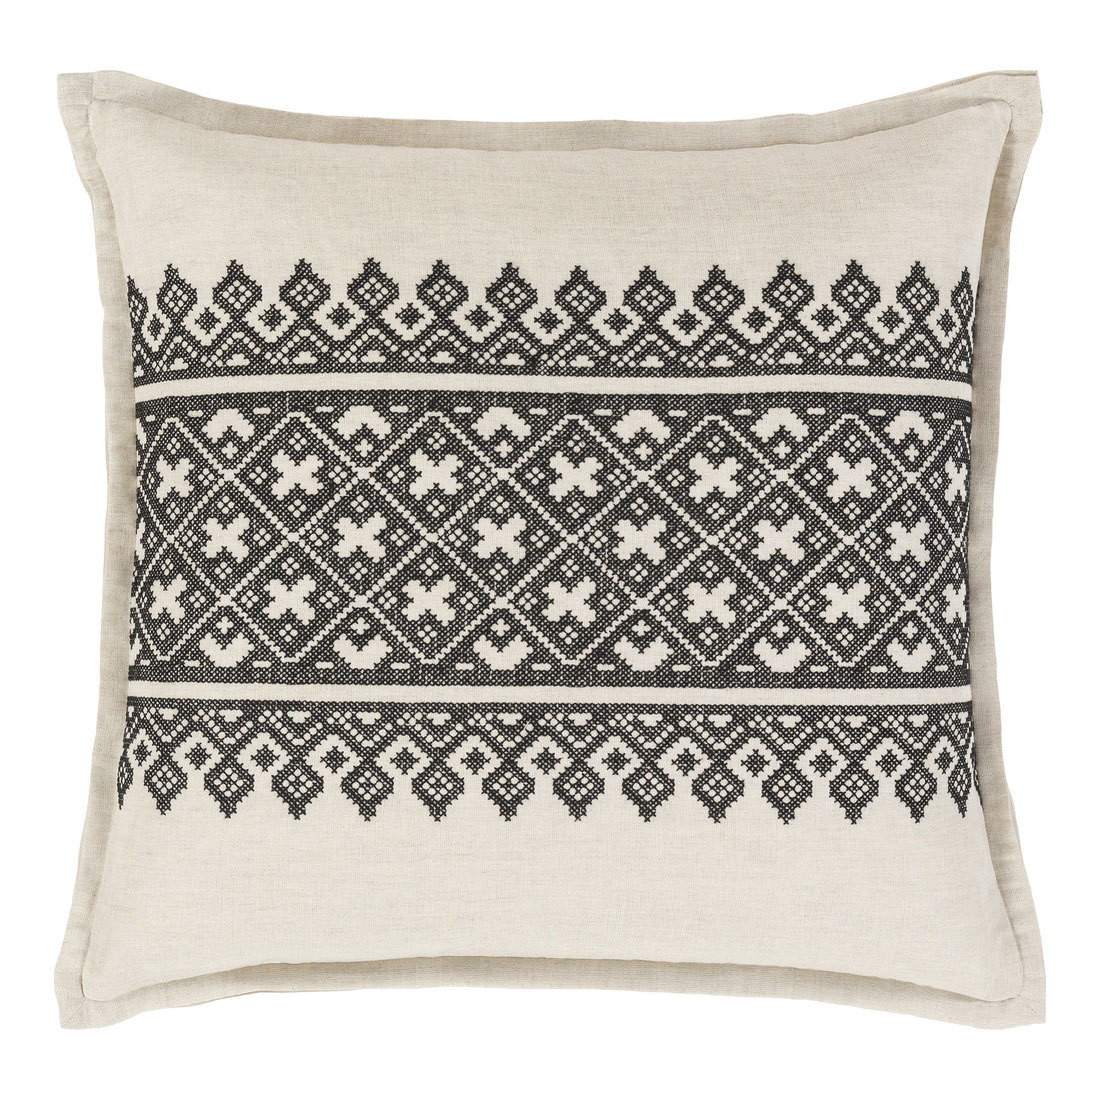 As Shown: Old World Pillow - PEN-002
Size: 18 x 18 inches
Material: Linen cotton blend in Black

Description: The cross-stitch motif of squares and triangles in this linen/cotton pillow straddles the old-world and the new. Quality craftsmanship from India speaks to the intricate, yet simple pattern in your choice of sizes and four colors. Charmingly filled with a removable inner of feather and down.